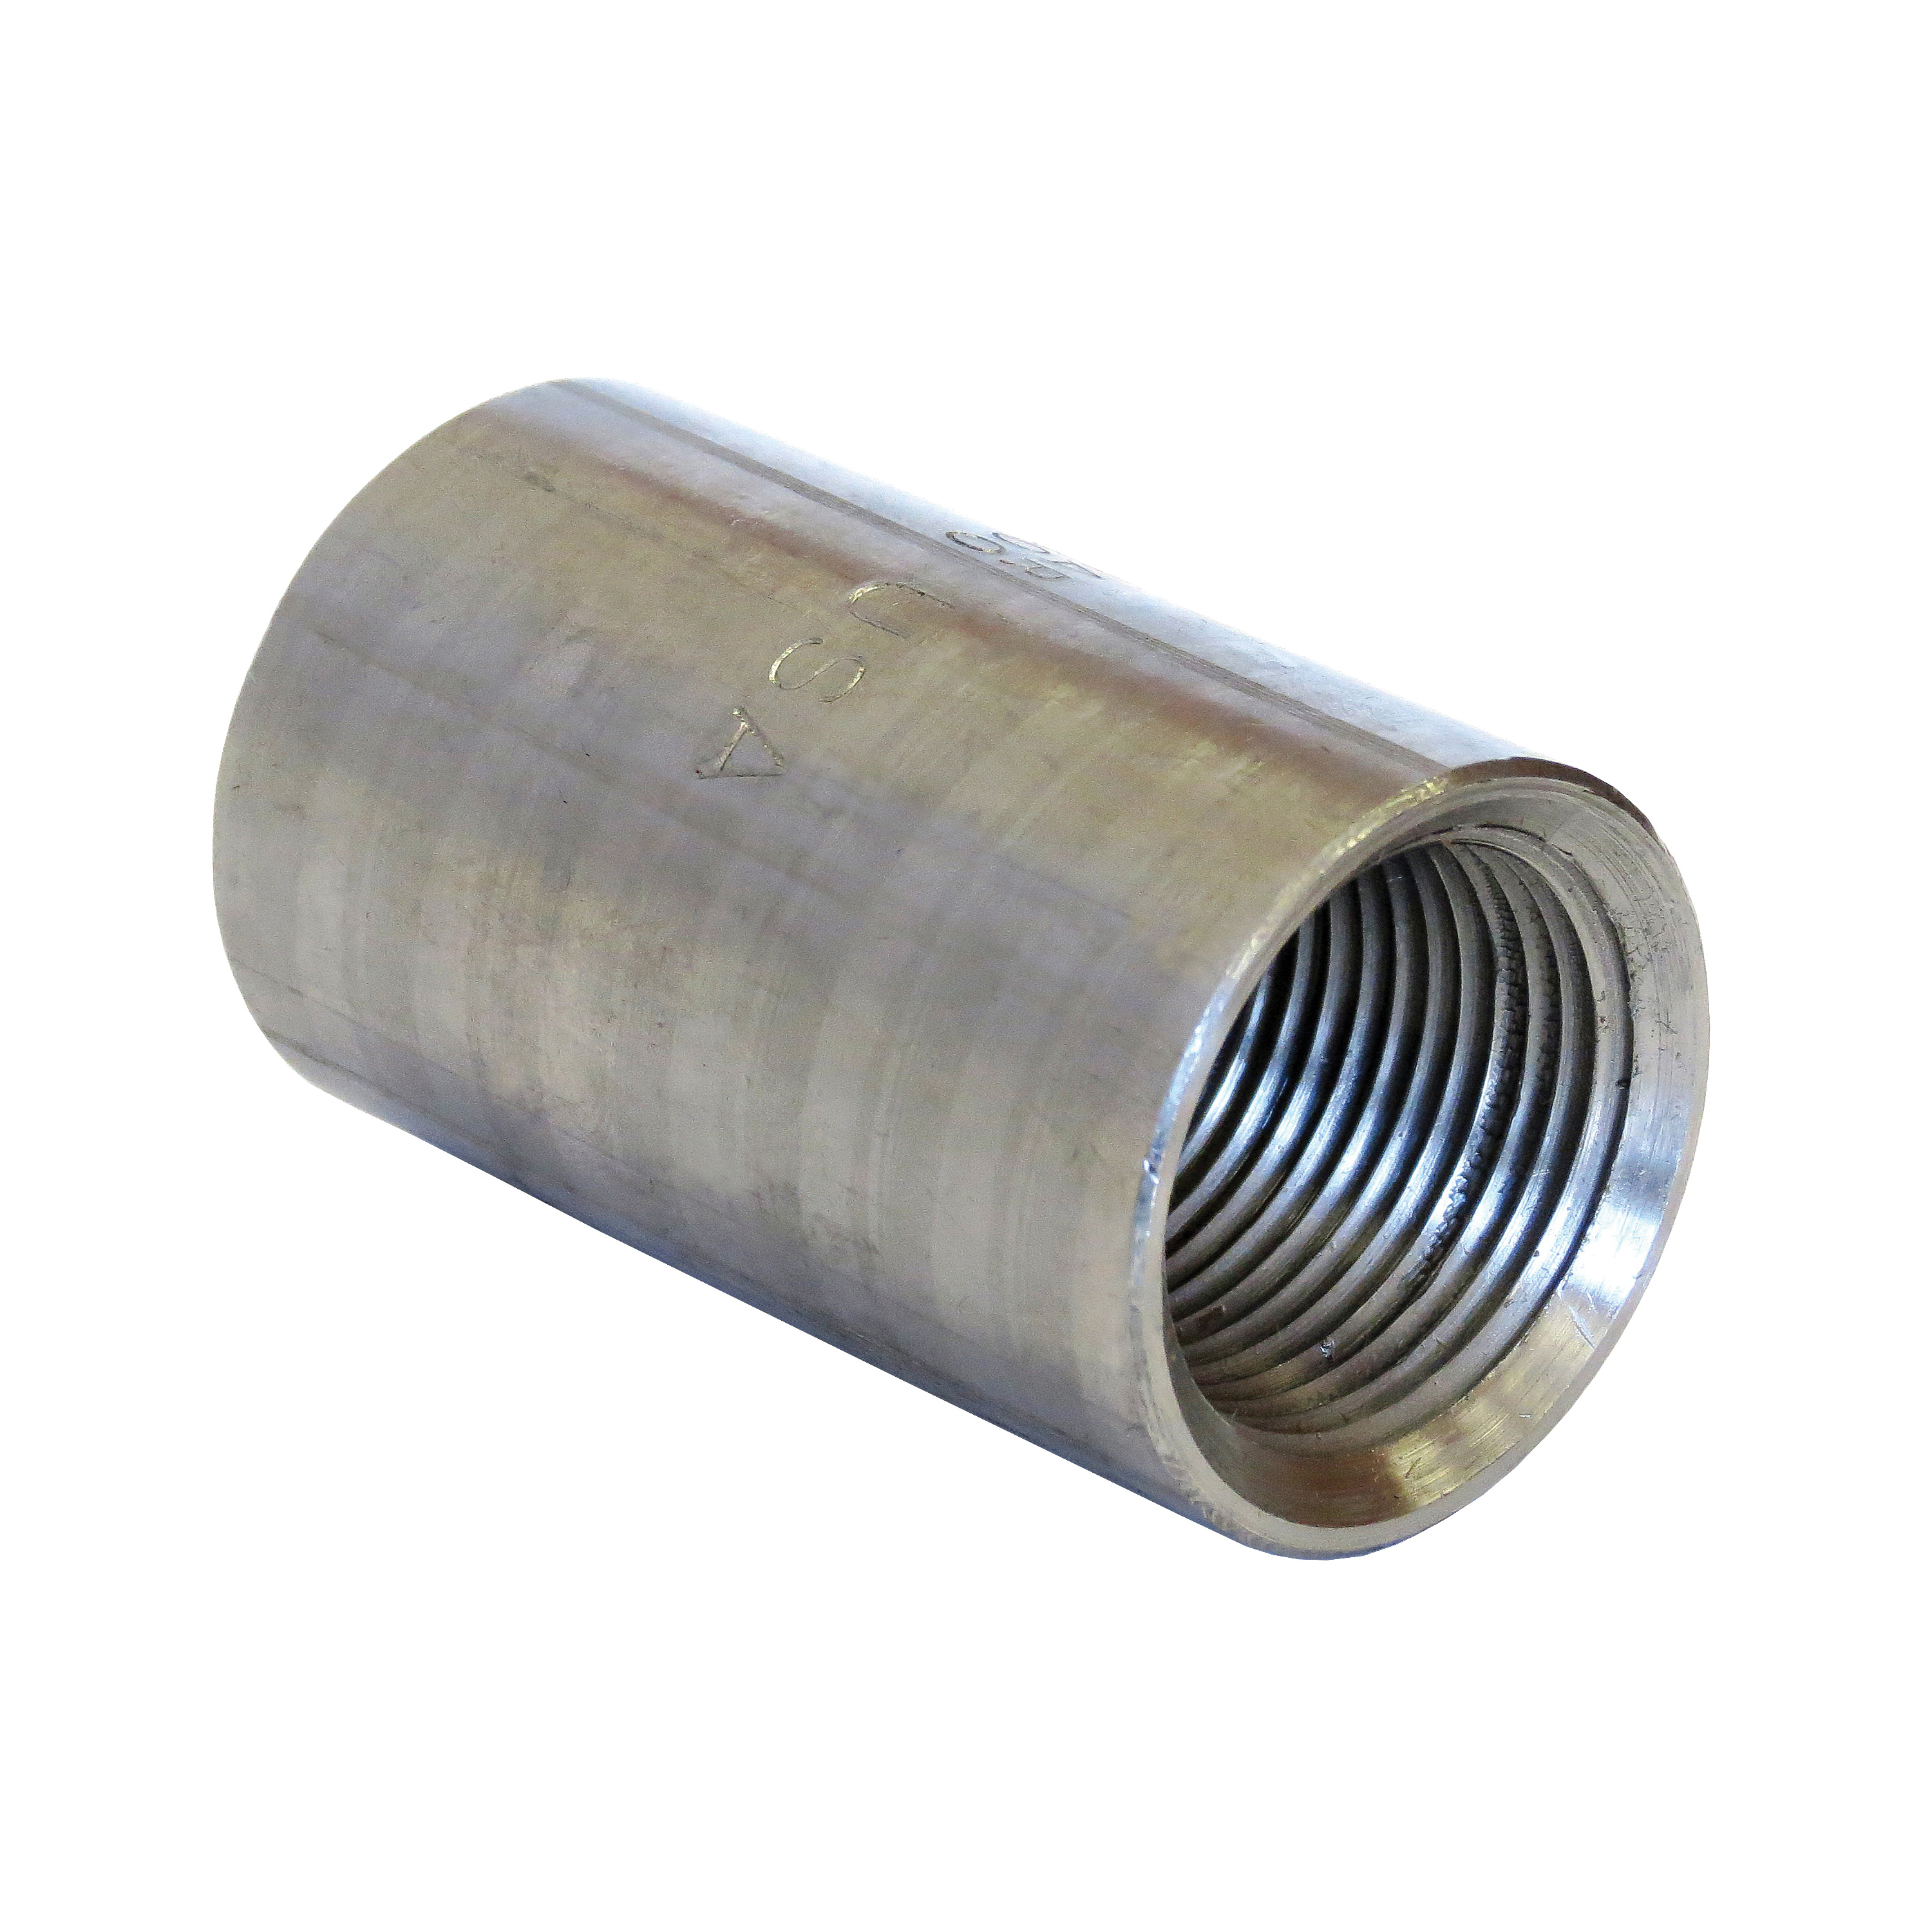 0321200628 FIG 337 Taper Tapped Non-Recessed Full Coupling, Steel, 6 in, SCH 80/XH and SCH XS, NPT, Galvanized, Domestic